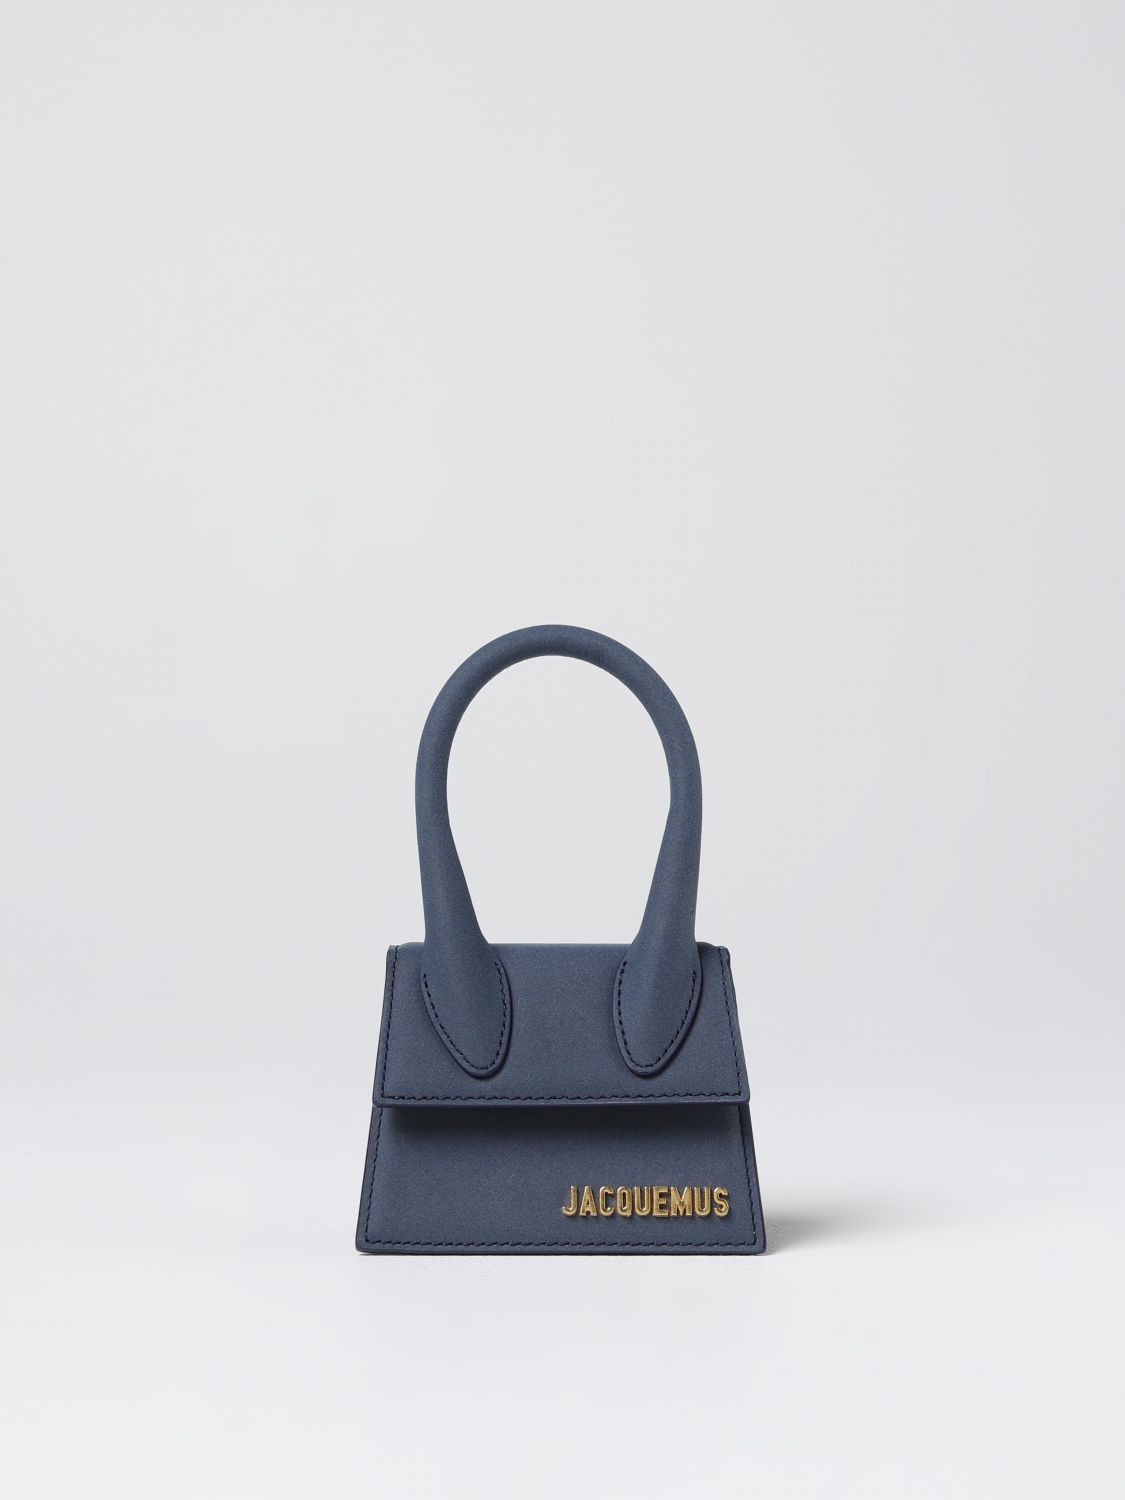 Jacquemus Le Chiquito Leather Mini Bag In Navy | ModeSens